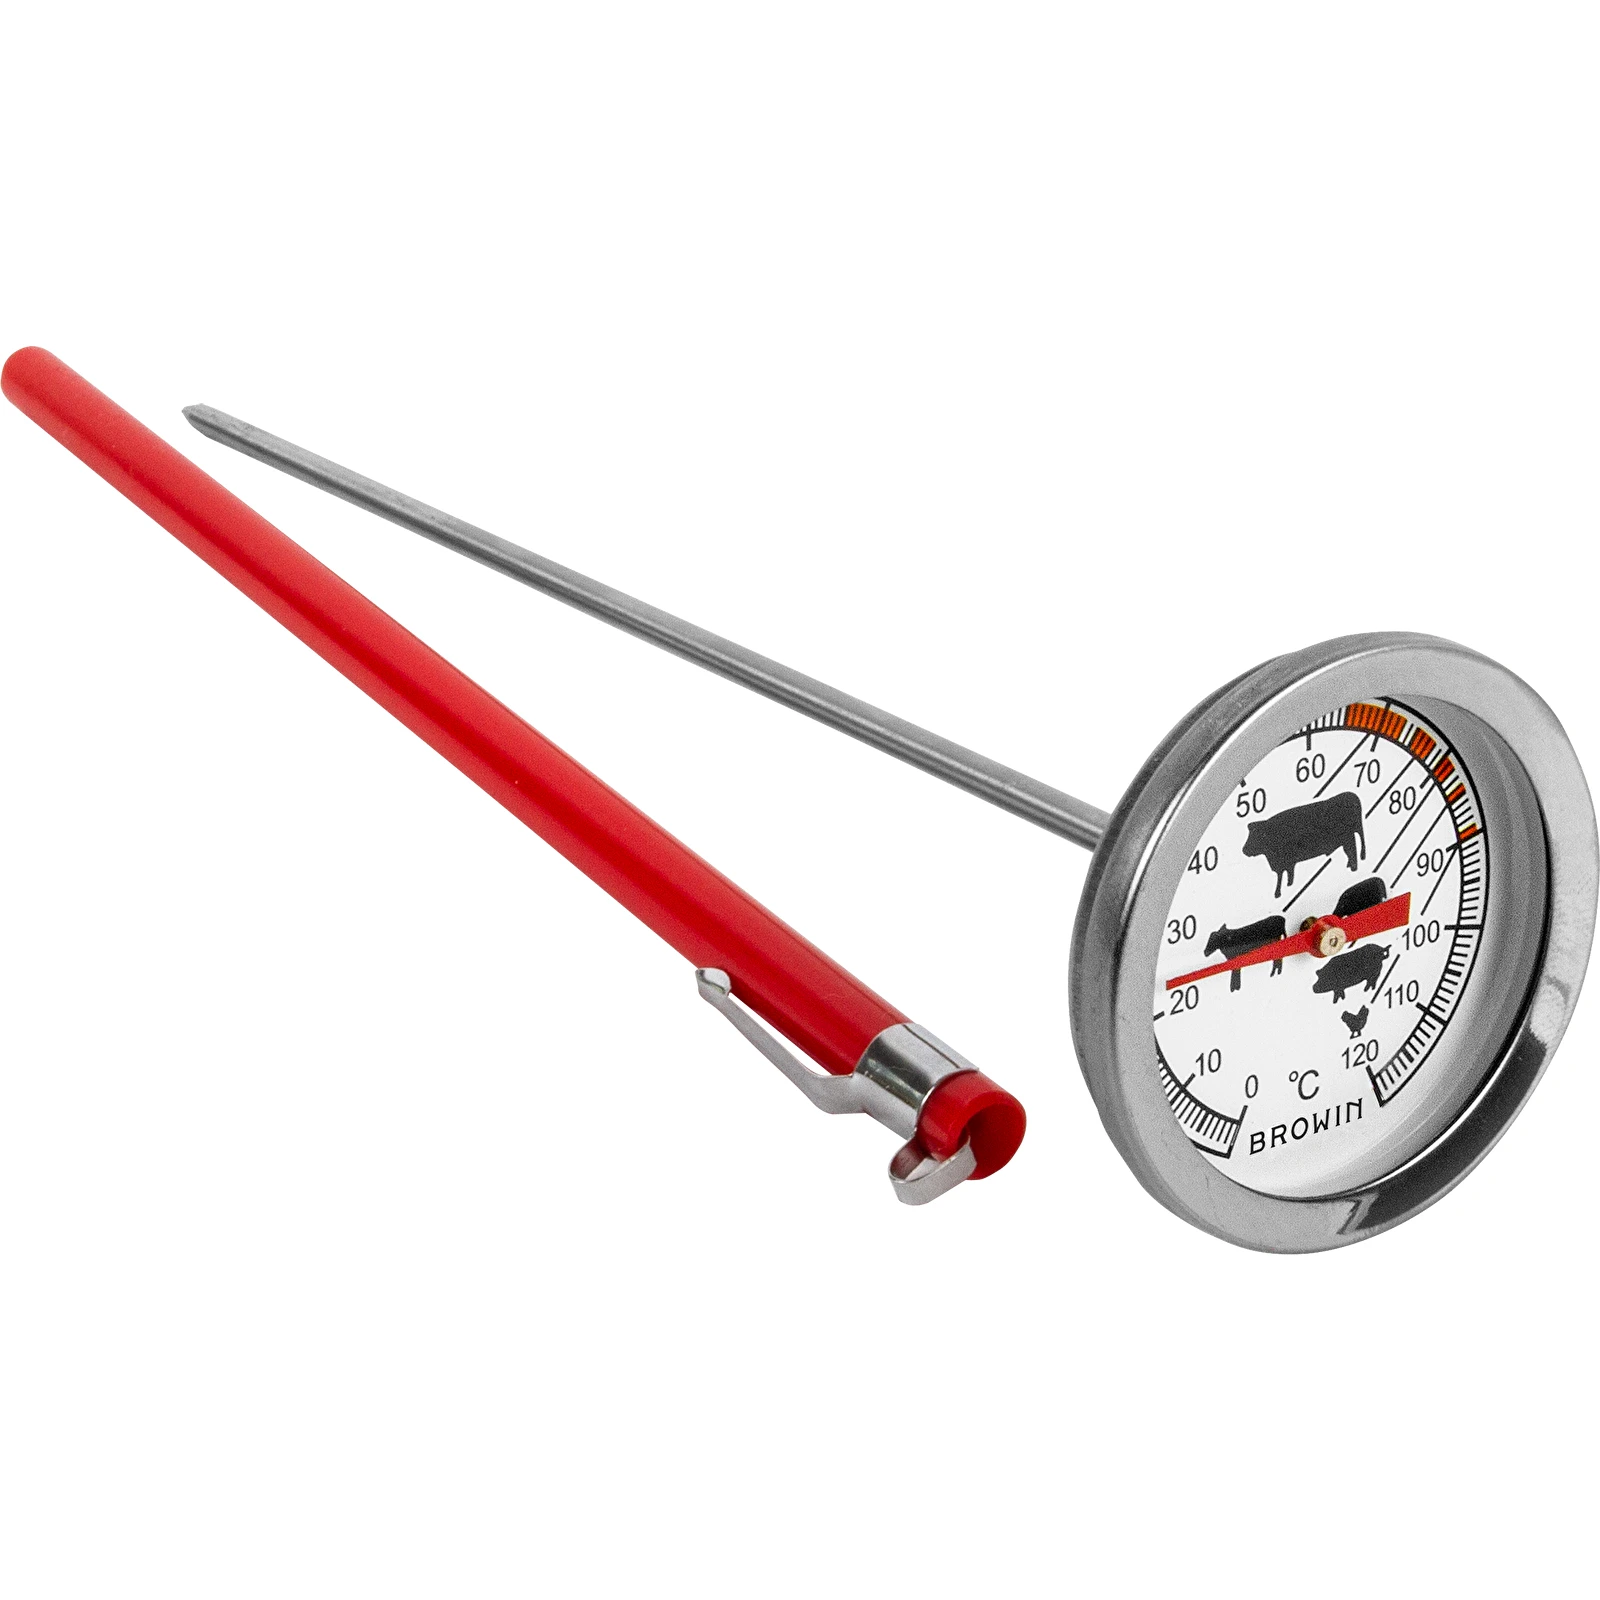 https://browin.com/static/images/1600/kitchen-thermometer-for-baking-roasting-smoking-and-cooking-120-c-101700.webp